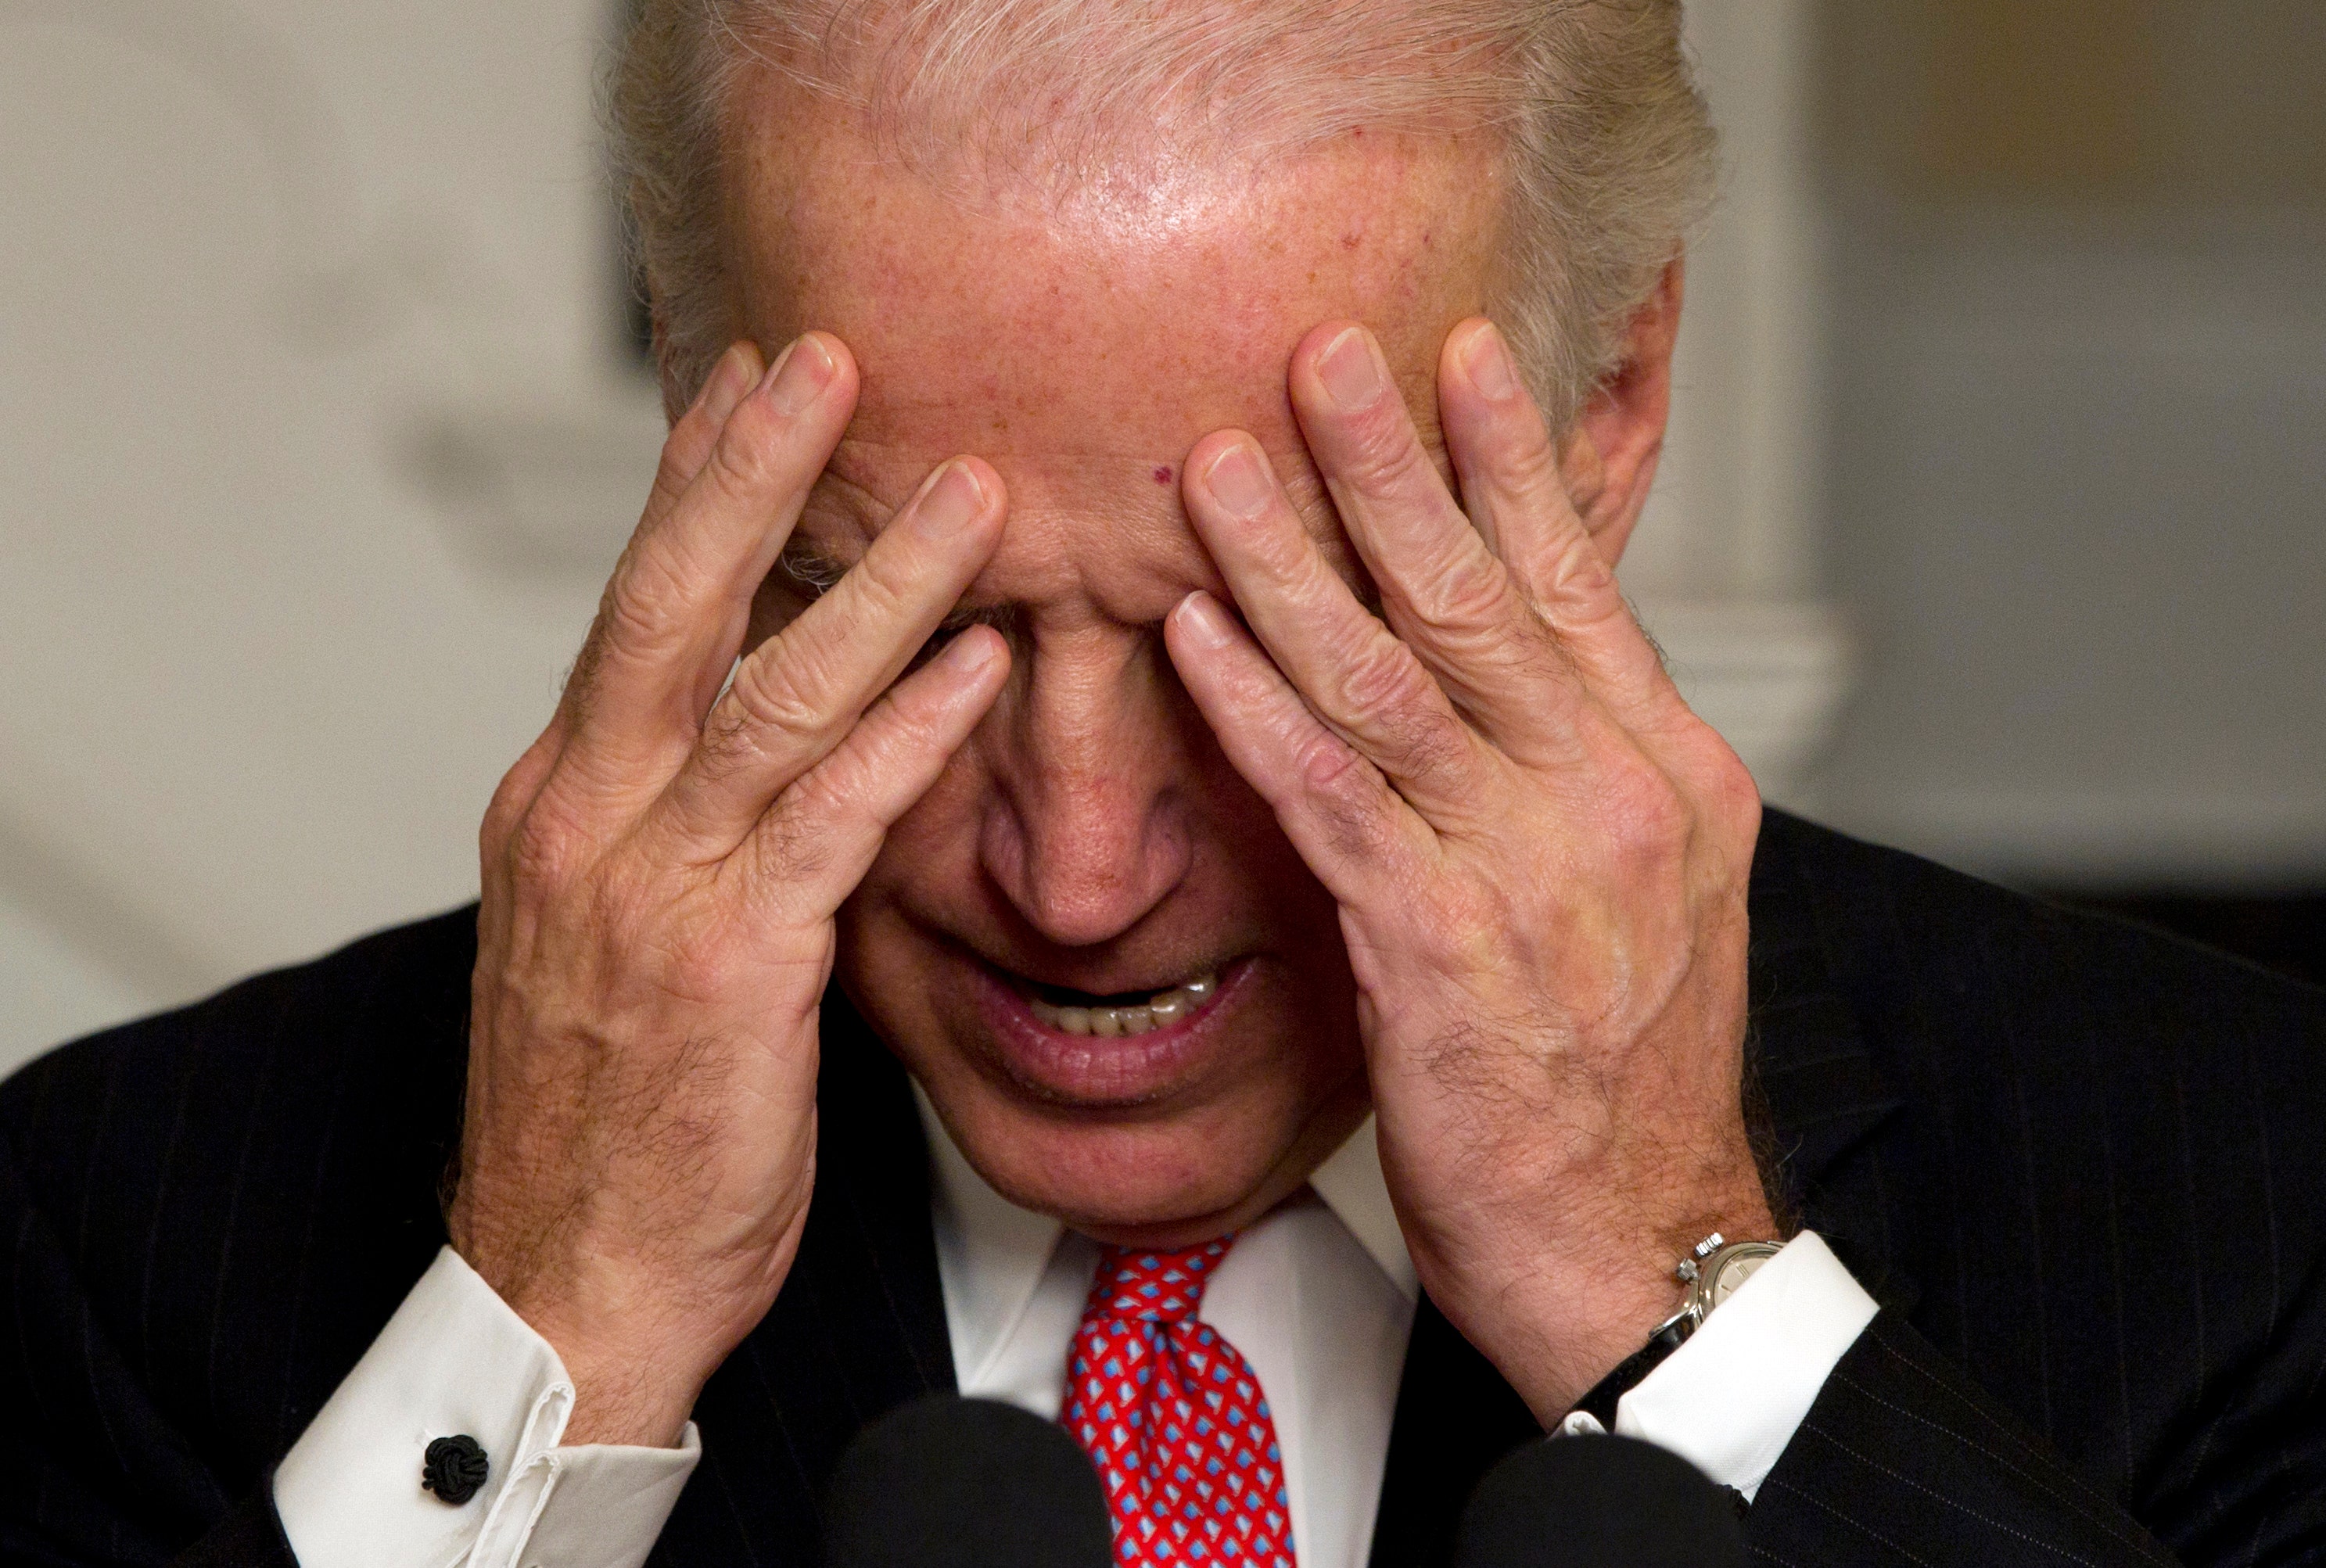 WaPo reporter deletes ‘grossly inappropriate’ tweet about Biden visit to cemetery where his family is buried